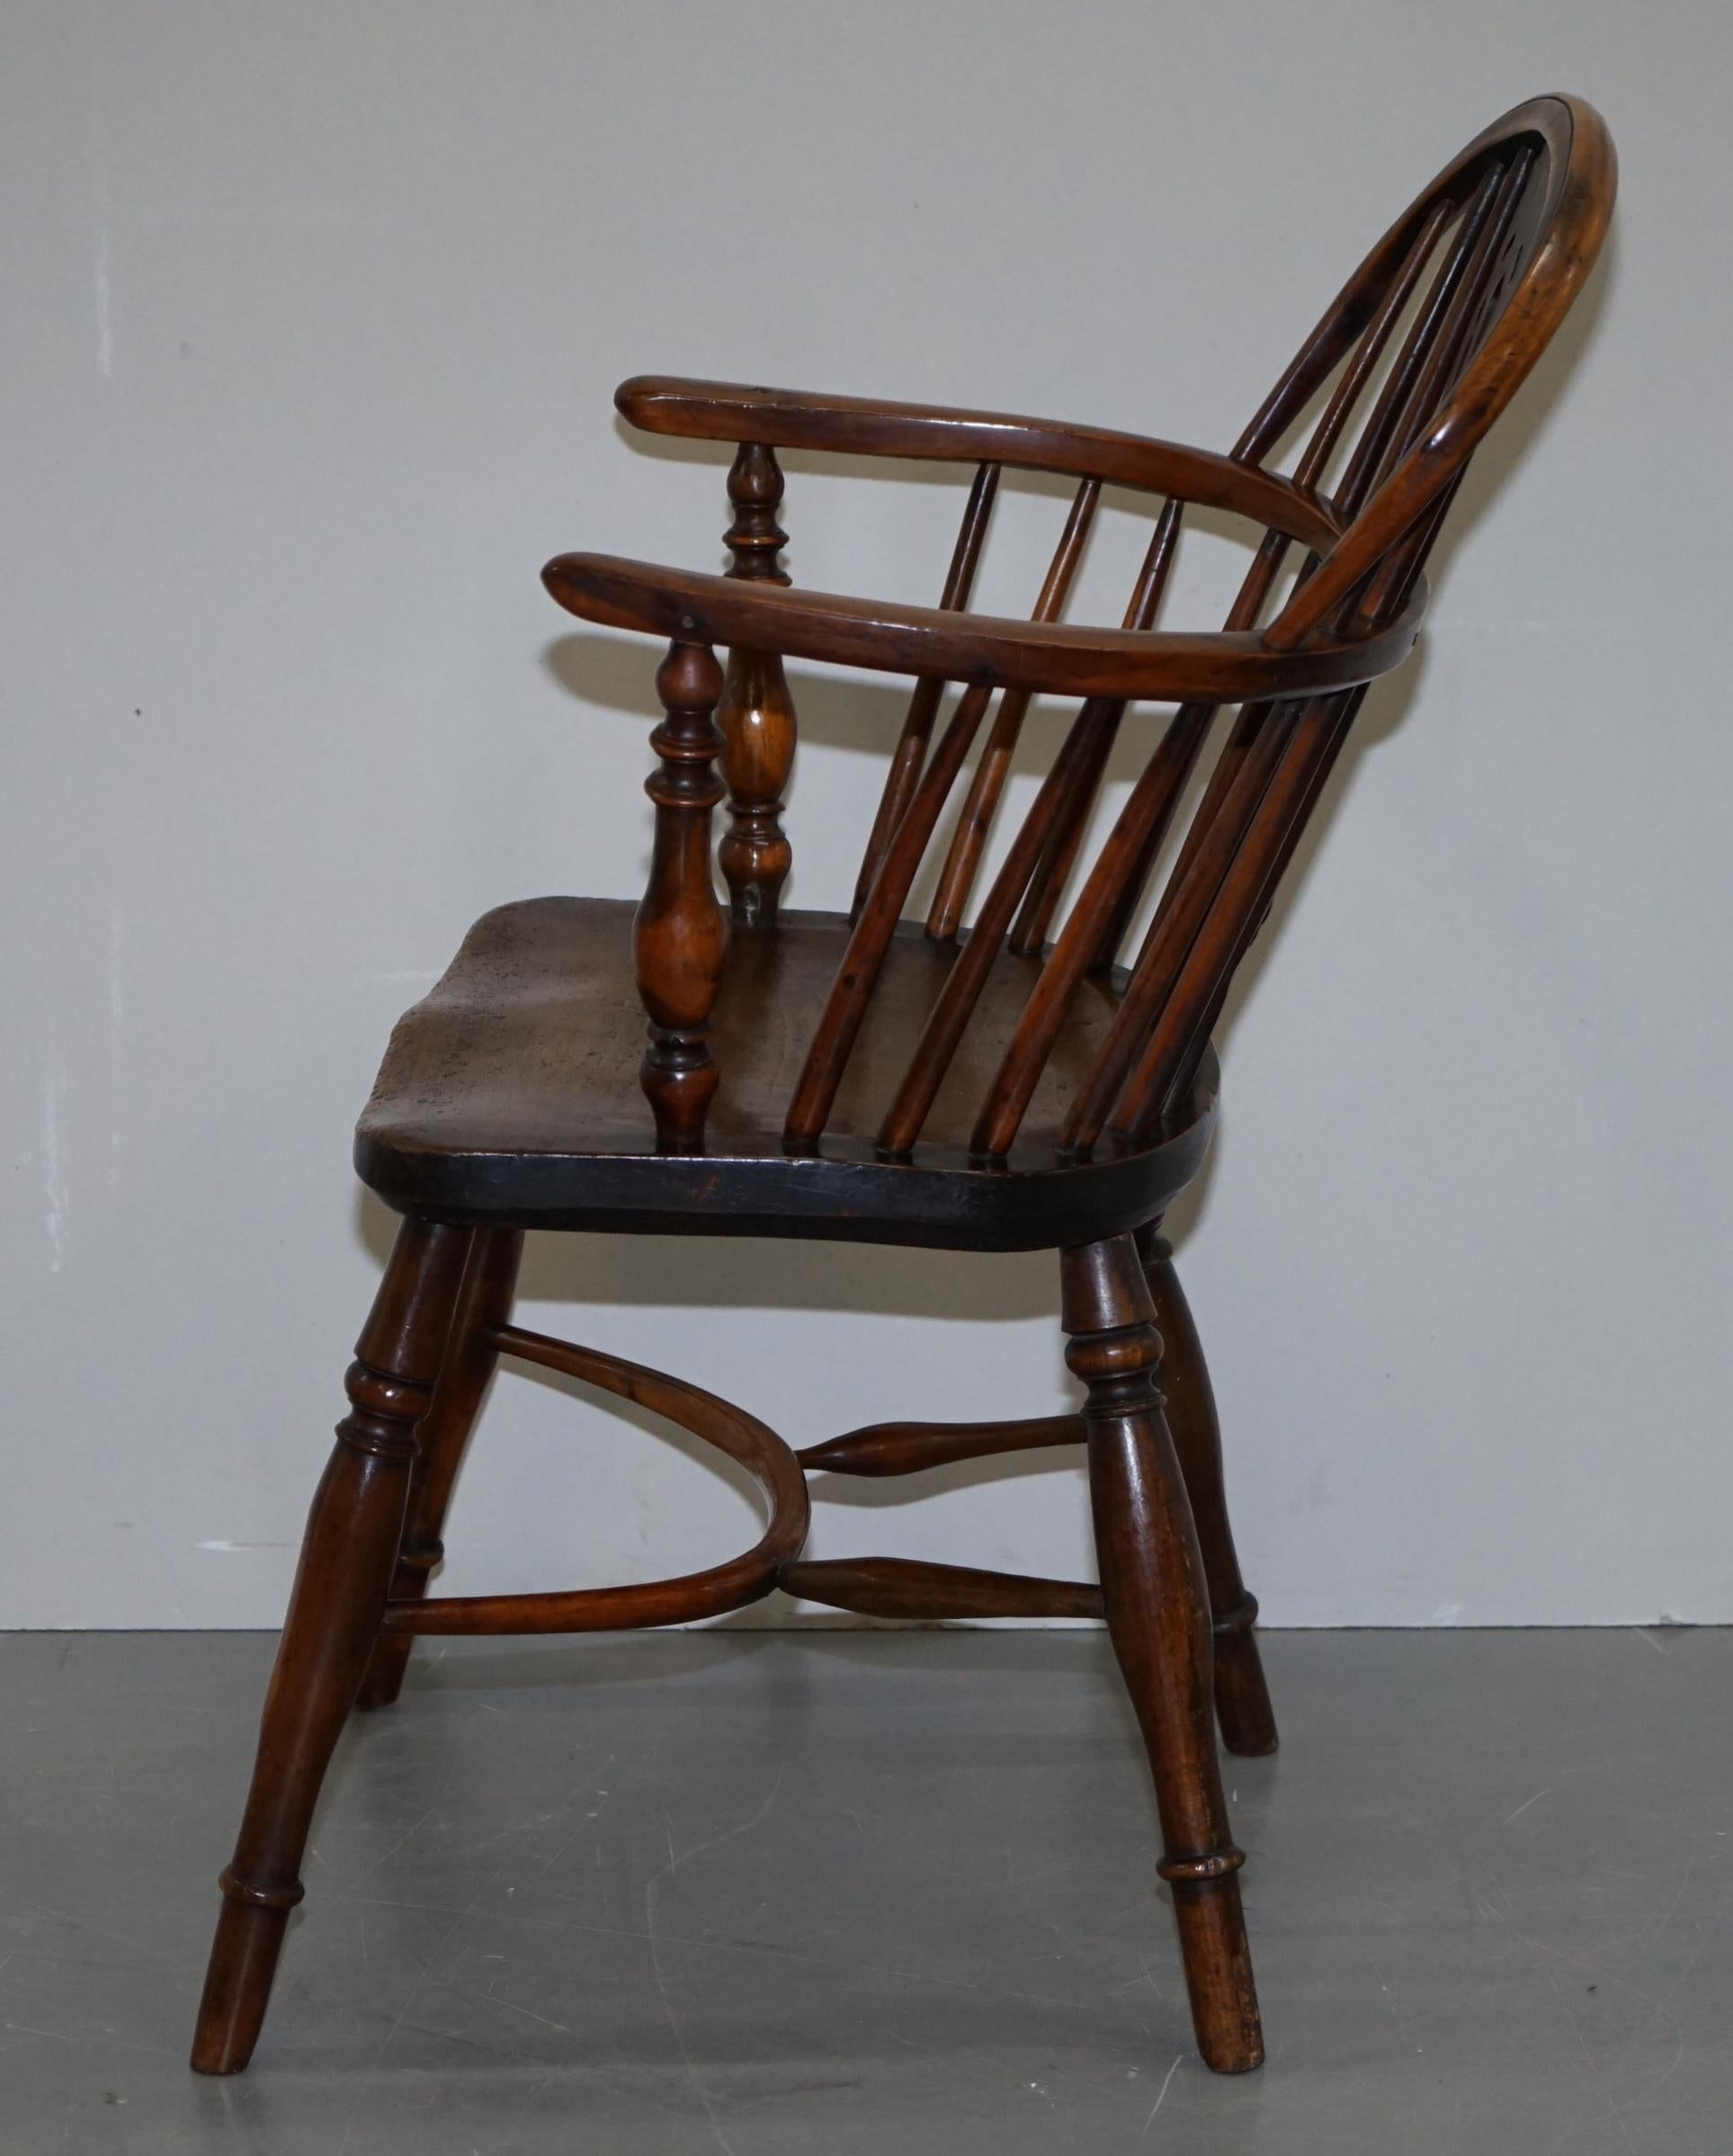 1 of 6 Burr Yew Wood Windsor Armchairs circa 1860 English Countryhouse Furniture For Sale 10